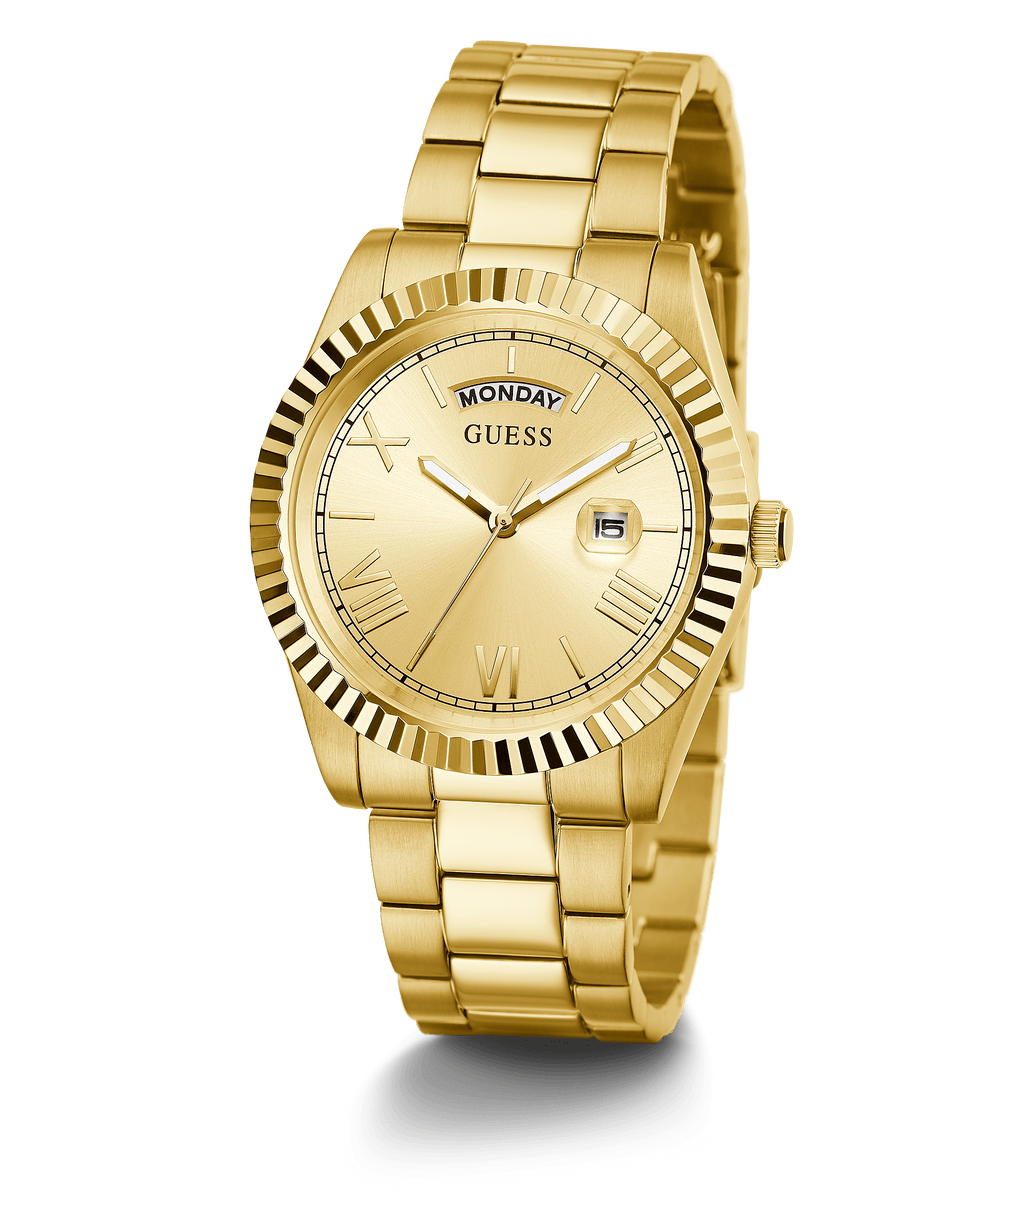 Tone Connoisseur Watches America GW0265G2 Steel of Guess – Watch Gold Stainless